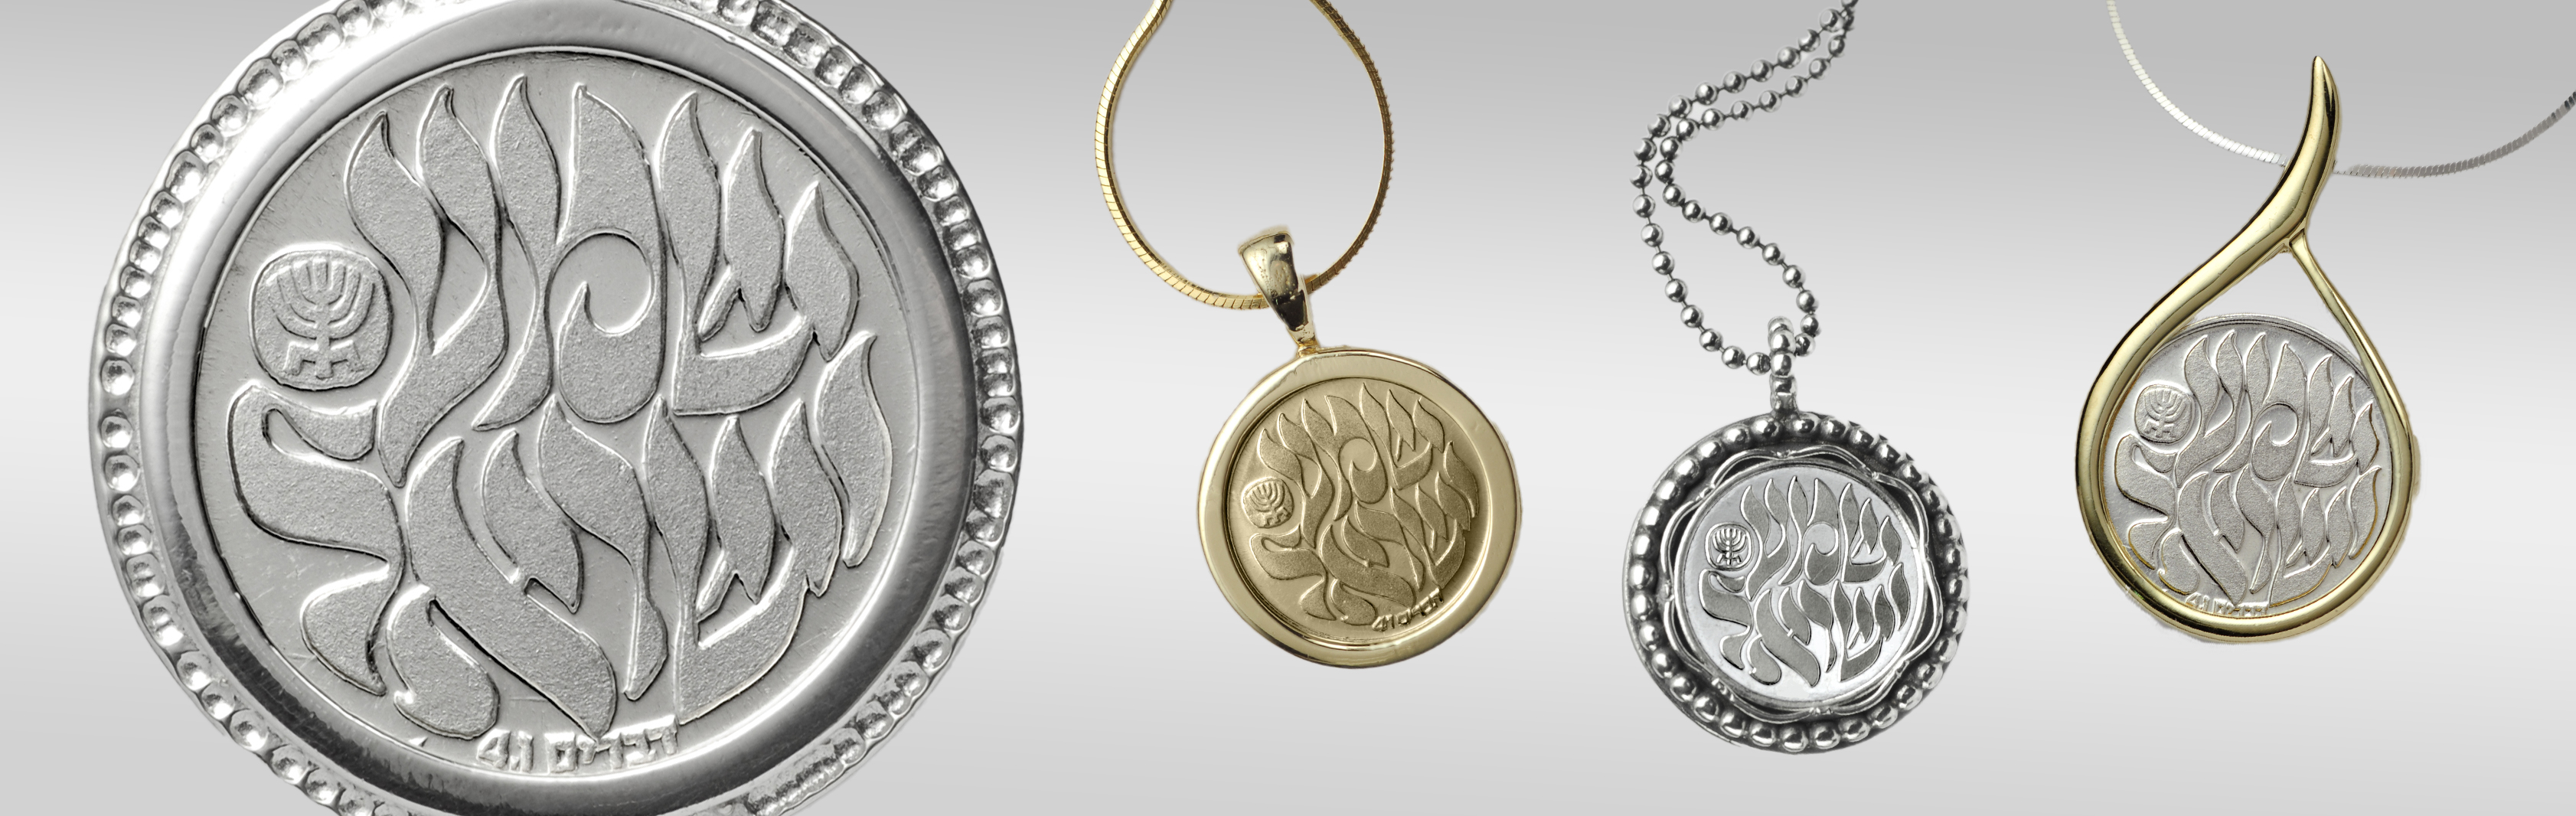 Shema Israel Blessing Adillion | State Medal set in 14K Gold and Silver Jewelry